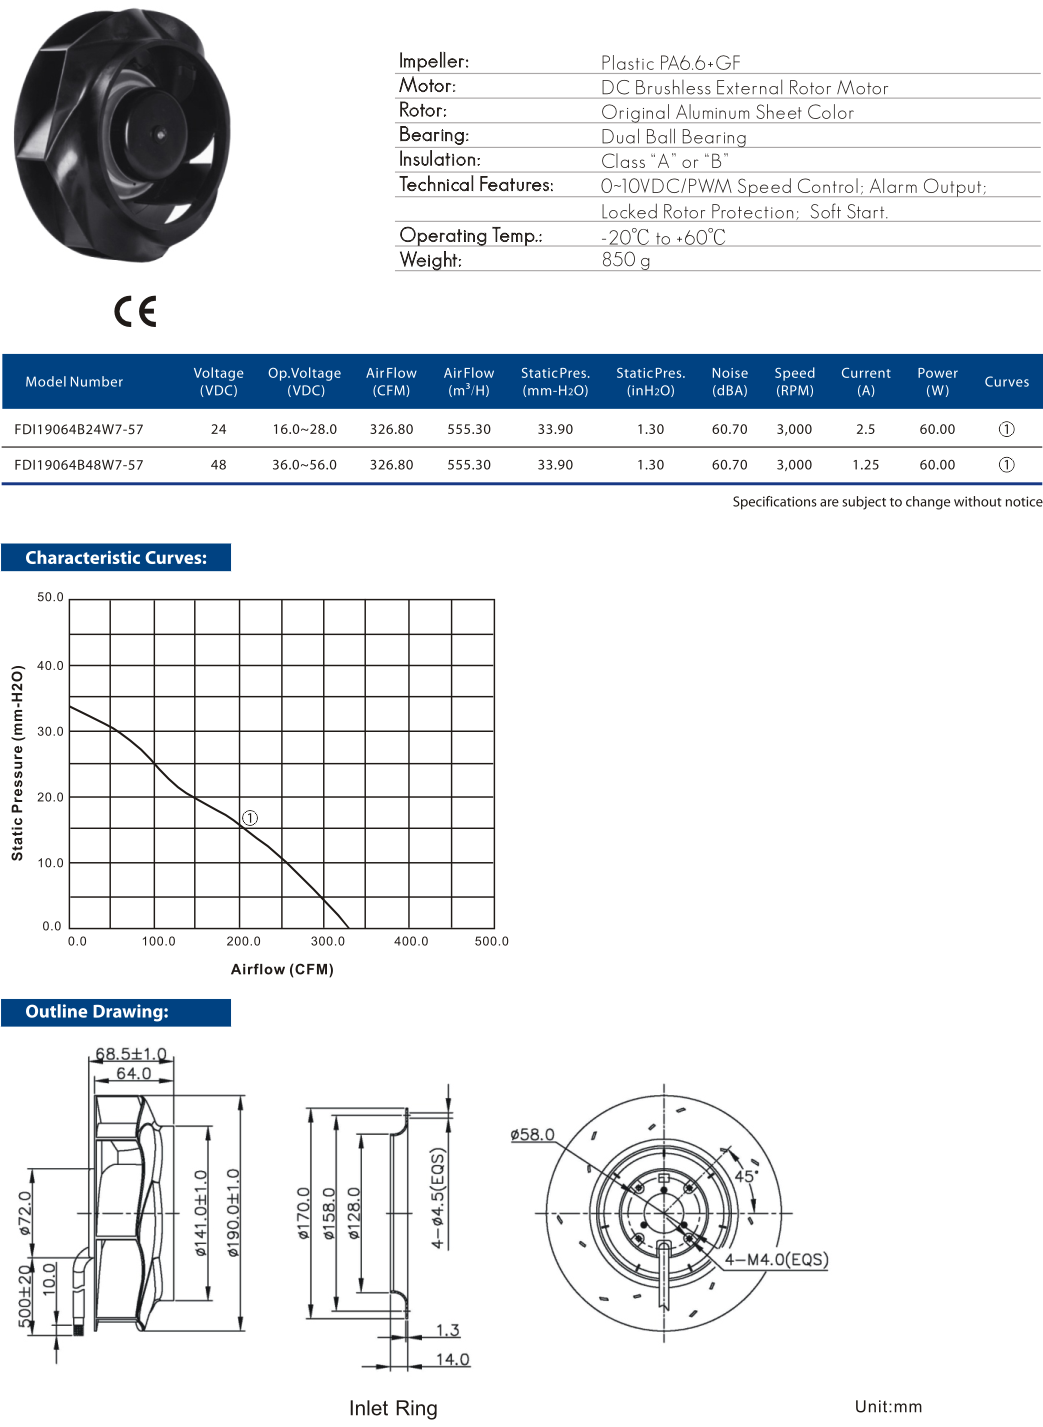 Cooltron DC Motorized Impellers